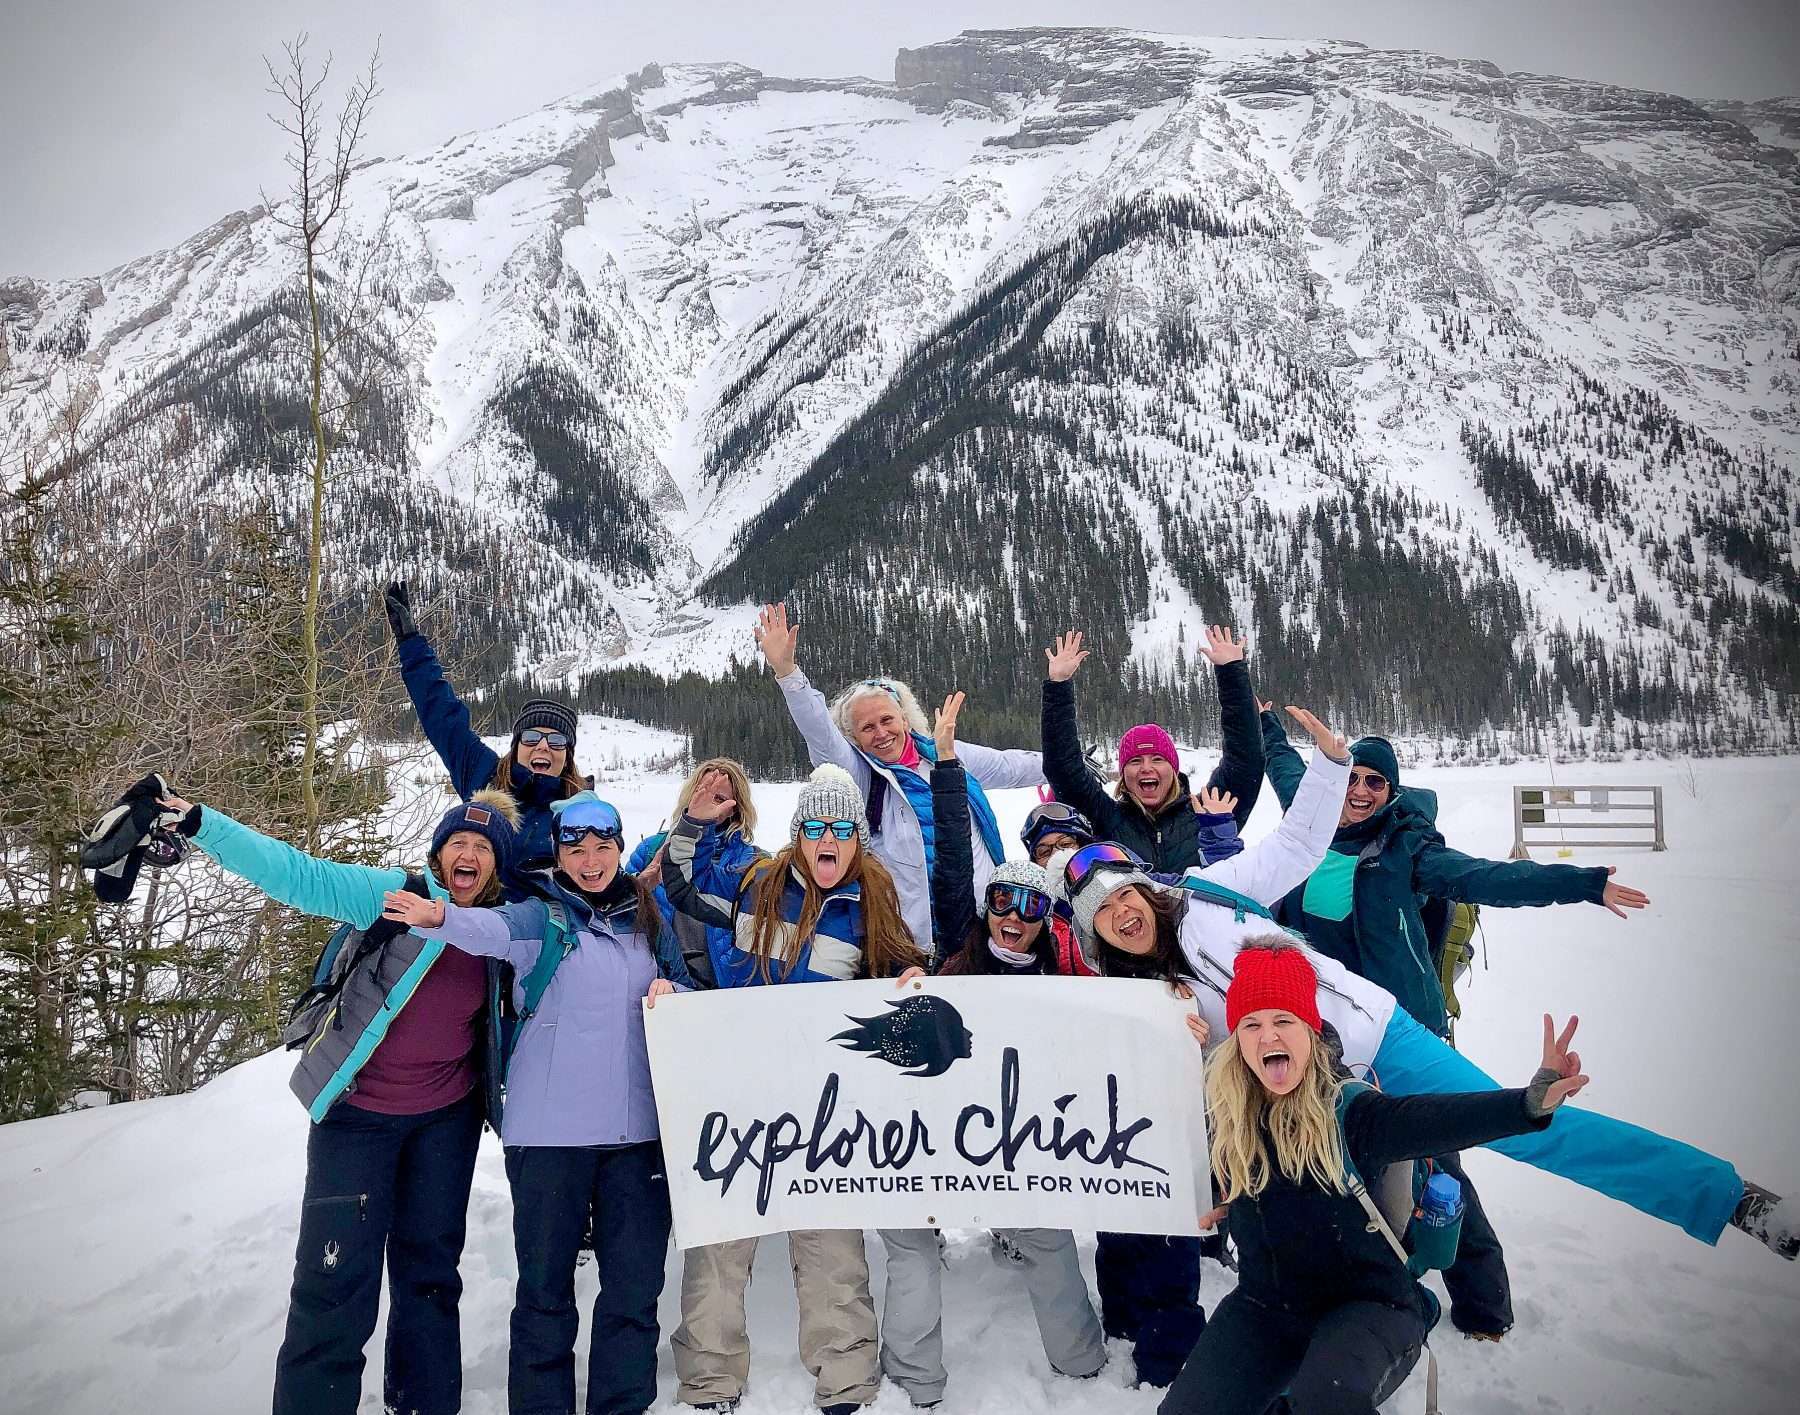 Women smiling and posing in front of a snow-covered mountain while holding an Explorer Chick banner